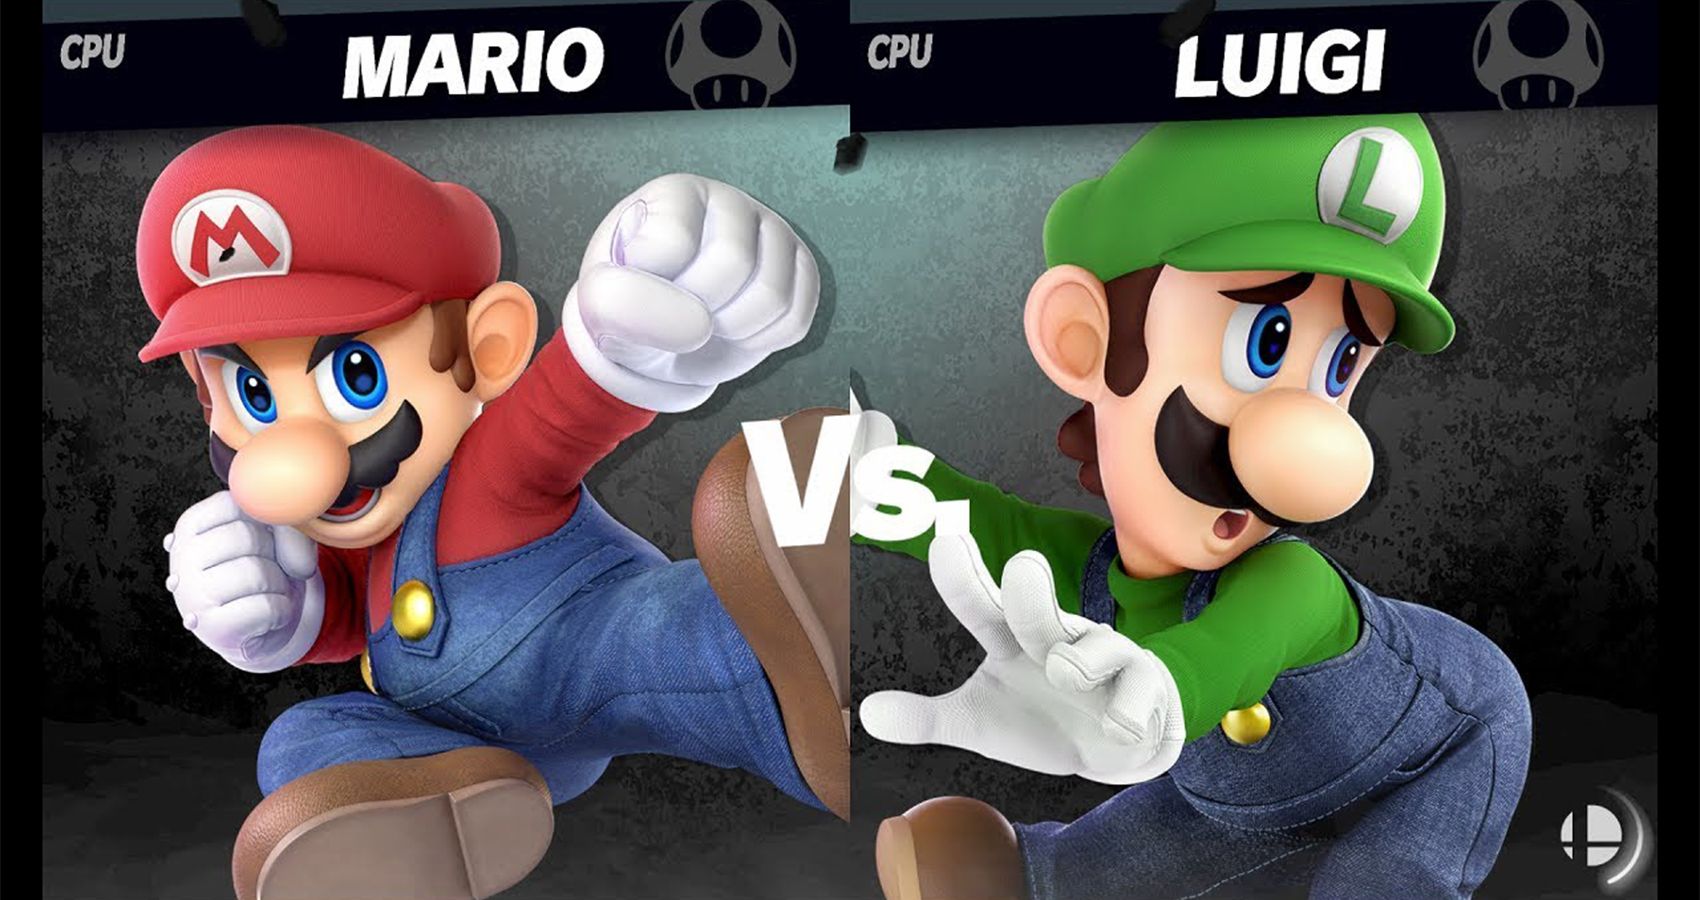 10 Hilarious Mario Vs Luigi Memes That Only Brothers Will Understand.